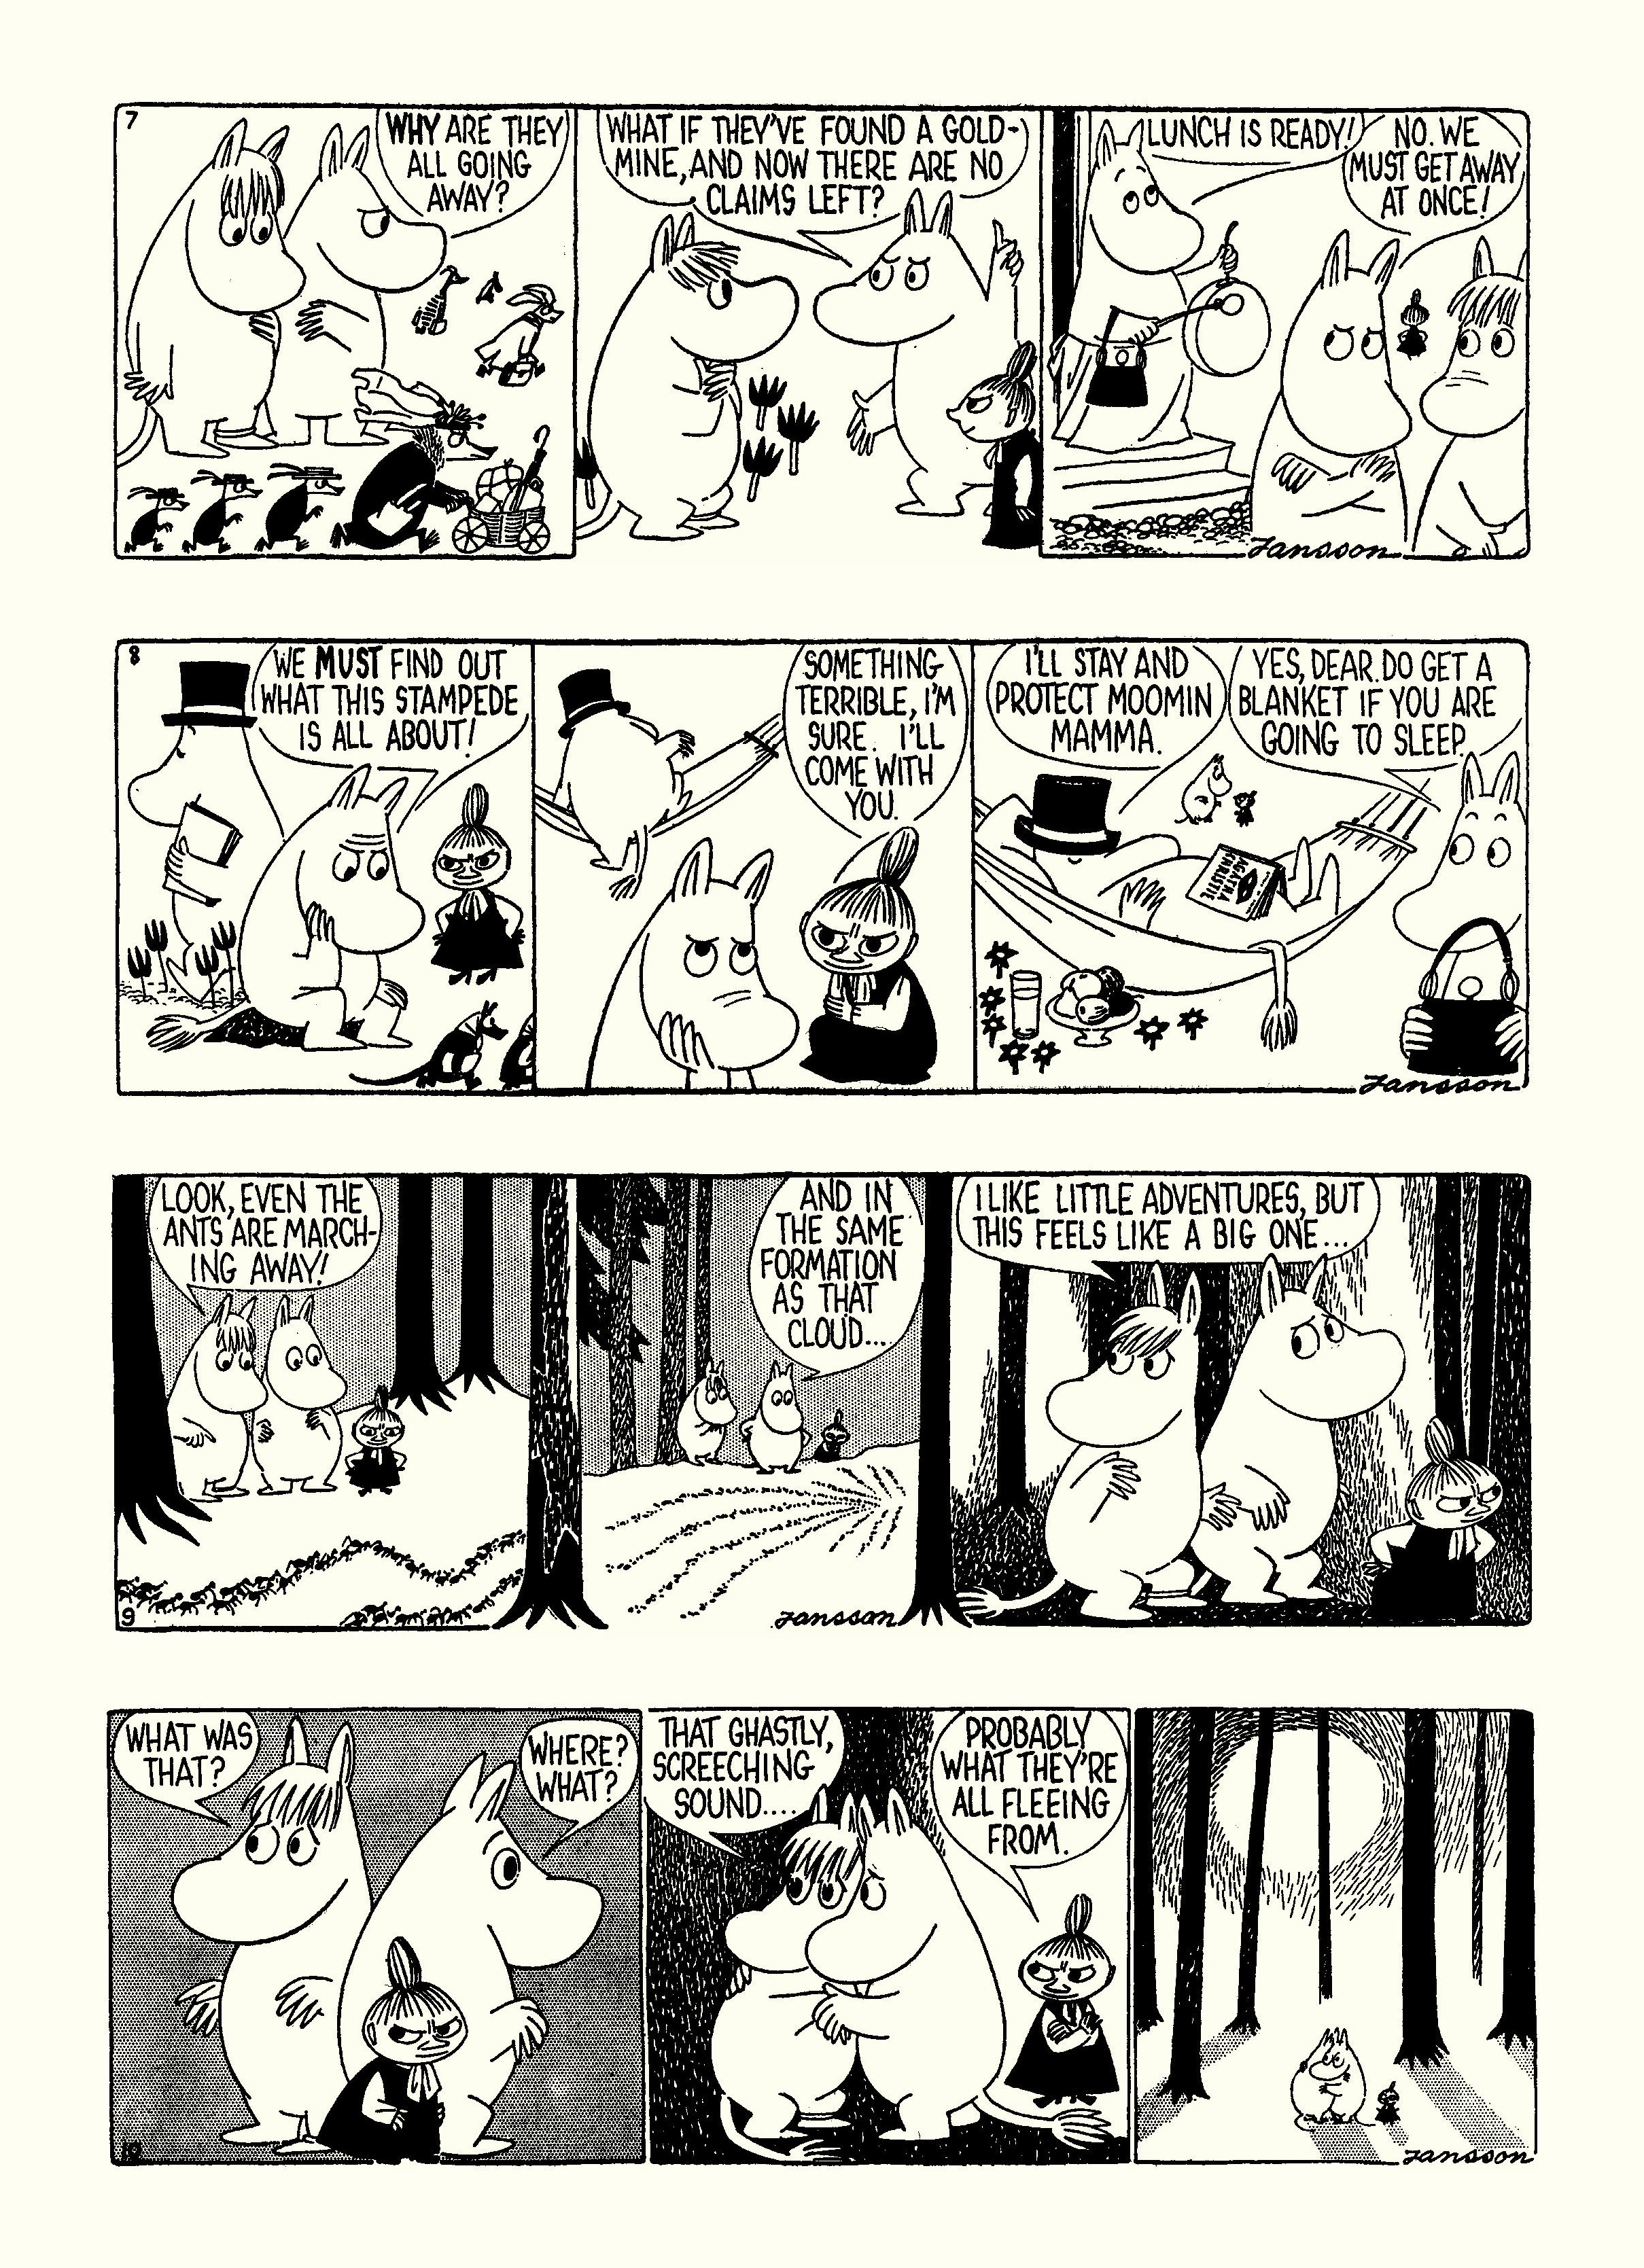 Read online Moomin: The Complete Tove Jansson Comic Strip comic -  Issue # TPB 4 - 60